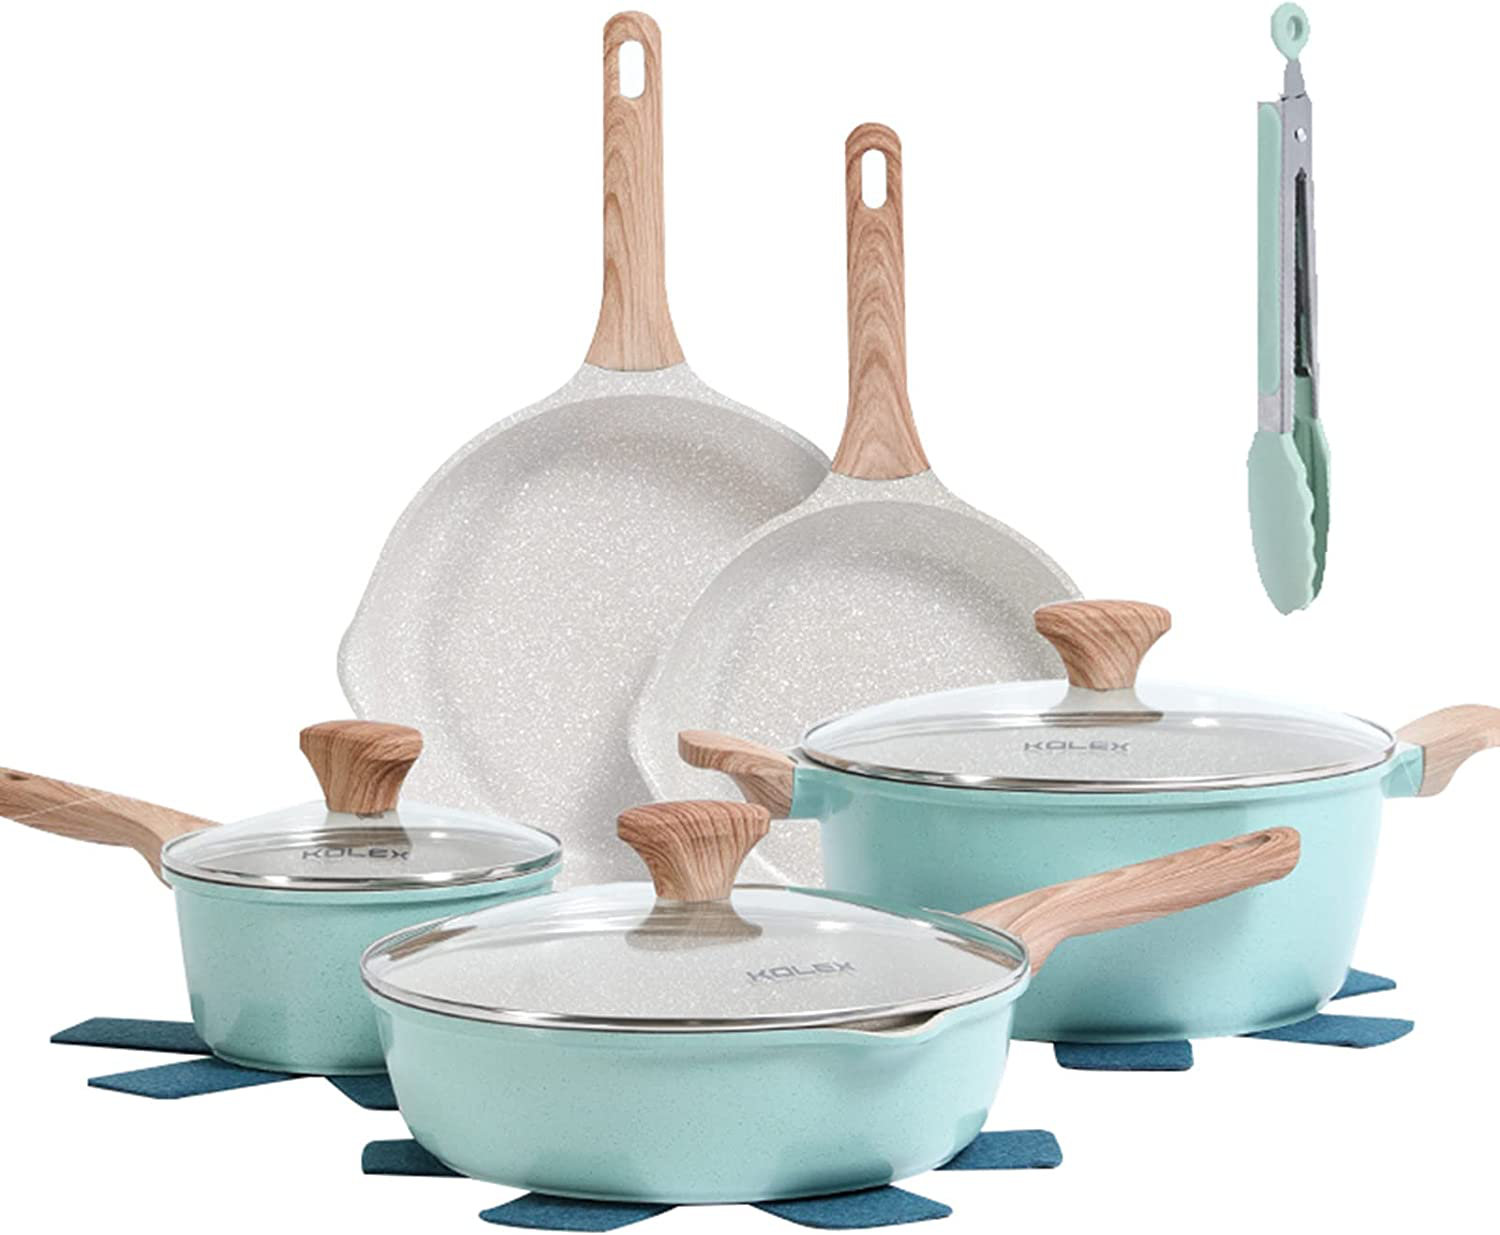 GreenLife Soft Grip Healthy Ceramic Non-stick Turquoise Cookware Pots and  Pans Set, 12-Piece 